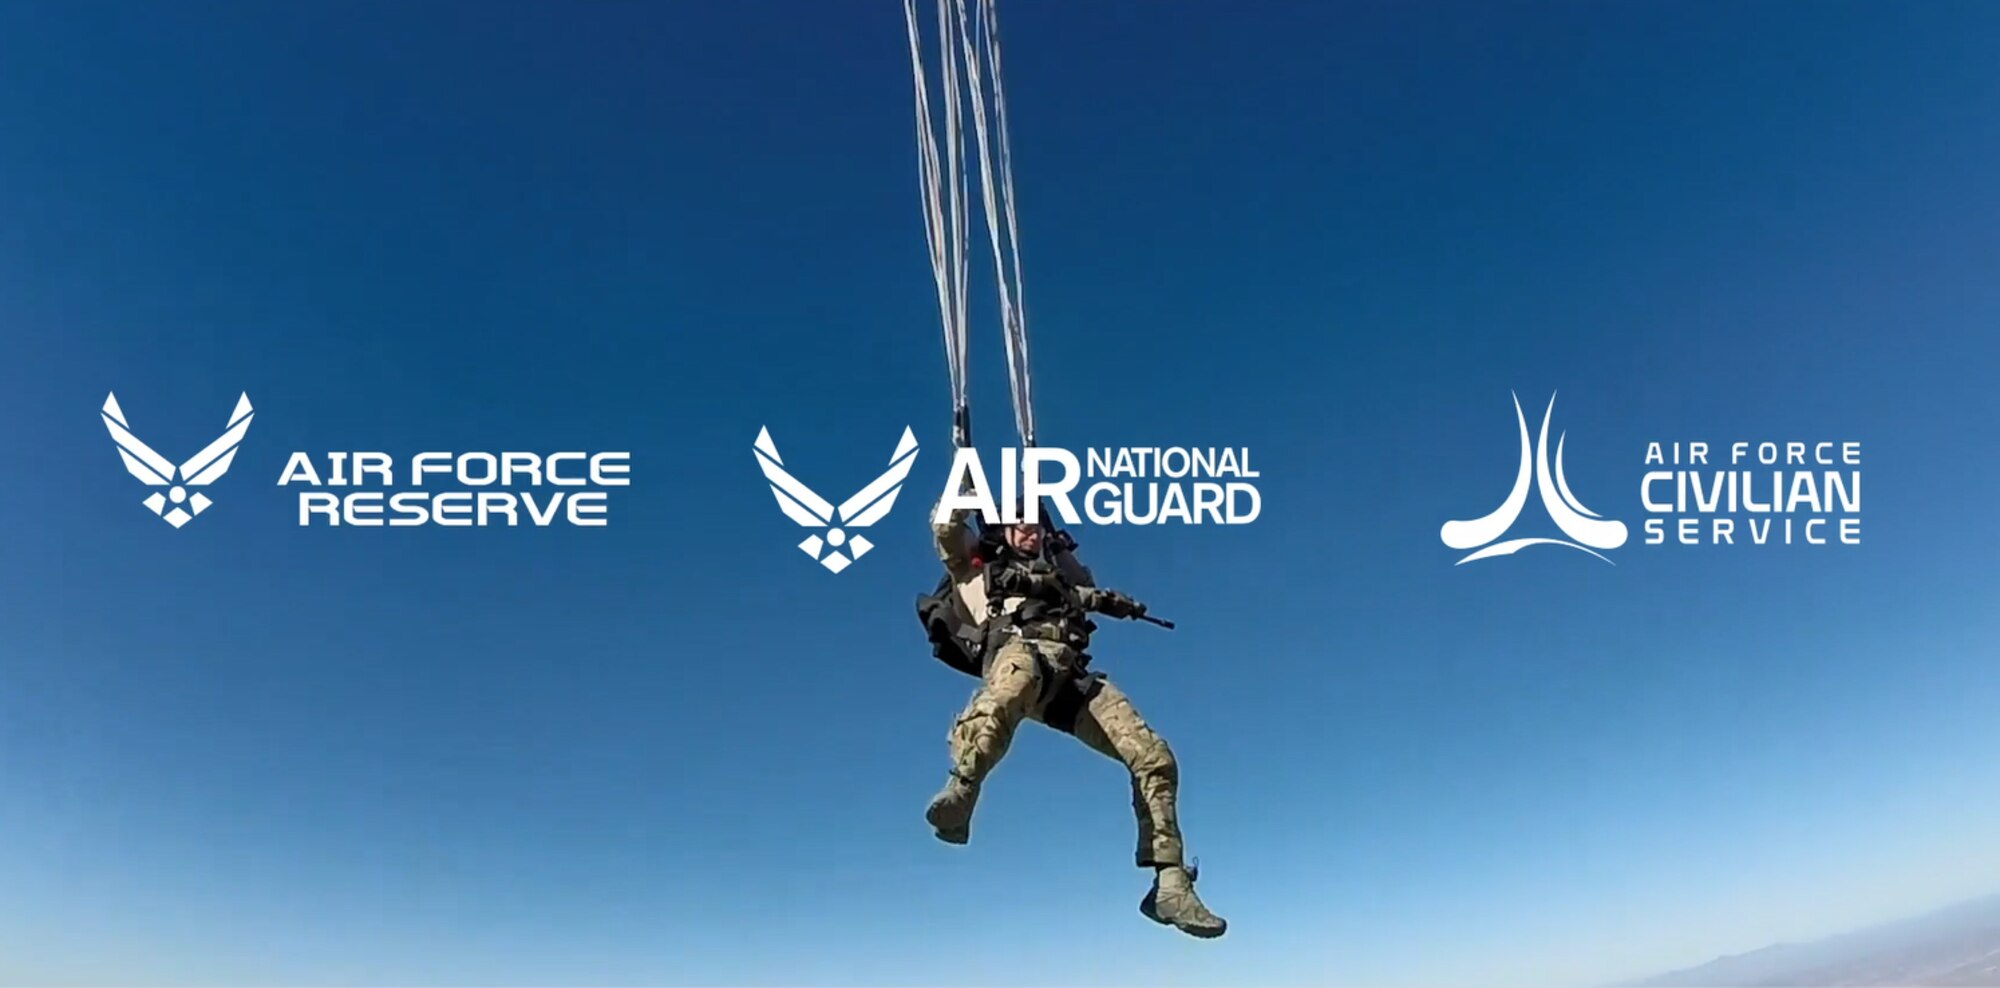 The Air Force Recruiting Service is releasing its first Total Force commercials to help inform the public of opportunities to serve in the United States Air Force, Air Force Reserve and Air National Guard, as well as Air Force Civilian Service.